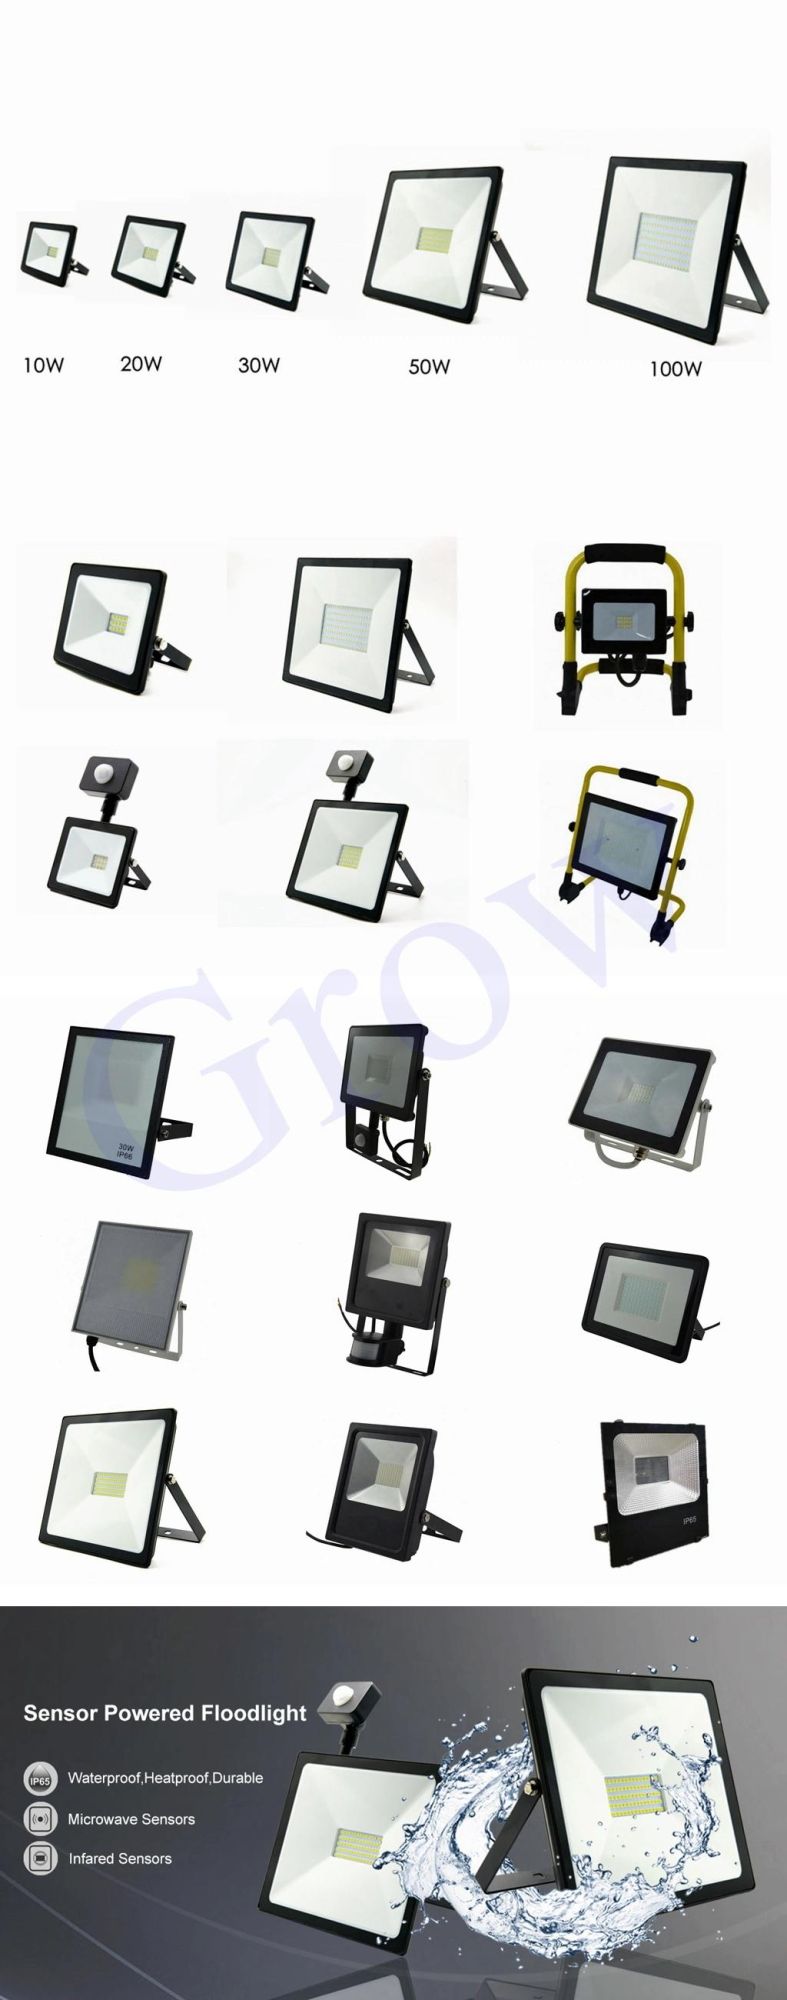 400W High Power LED Floodlight for Outdoor Work Lighting with High Lumen